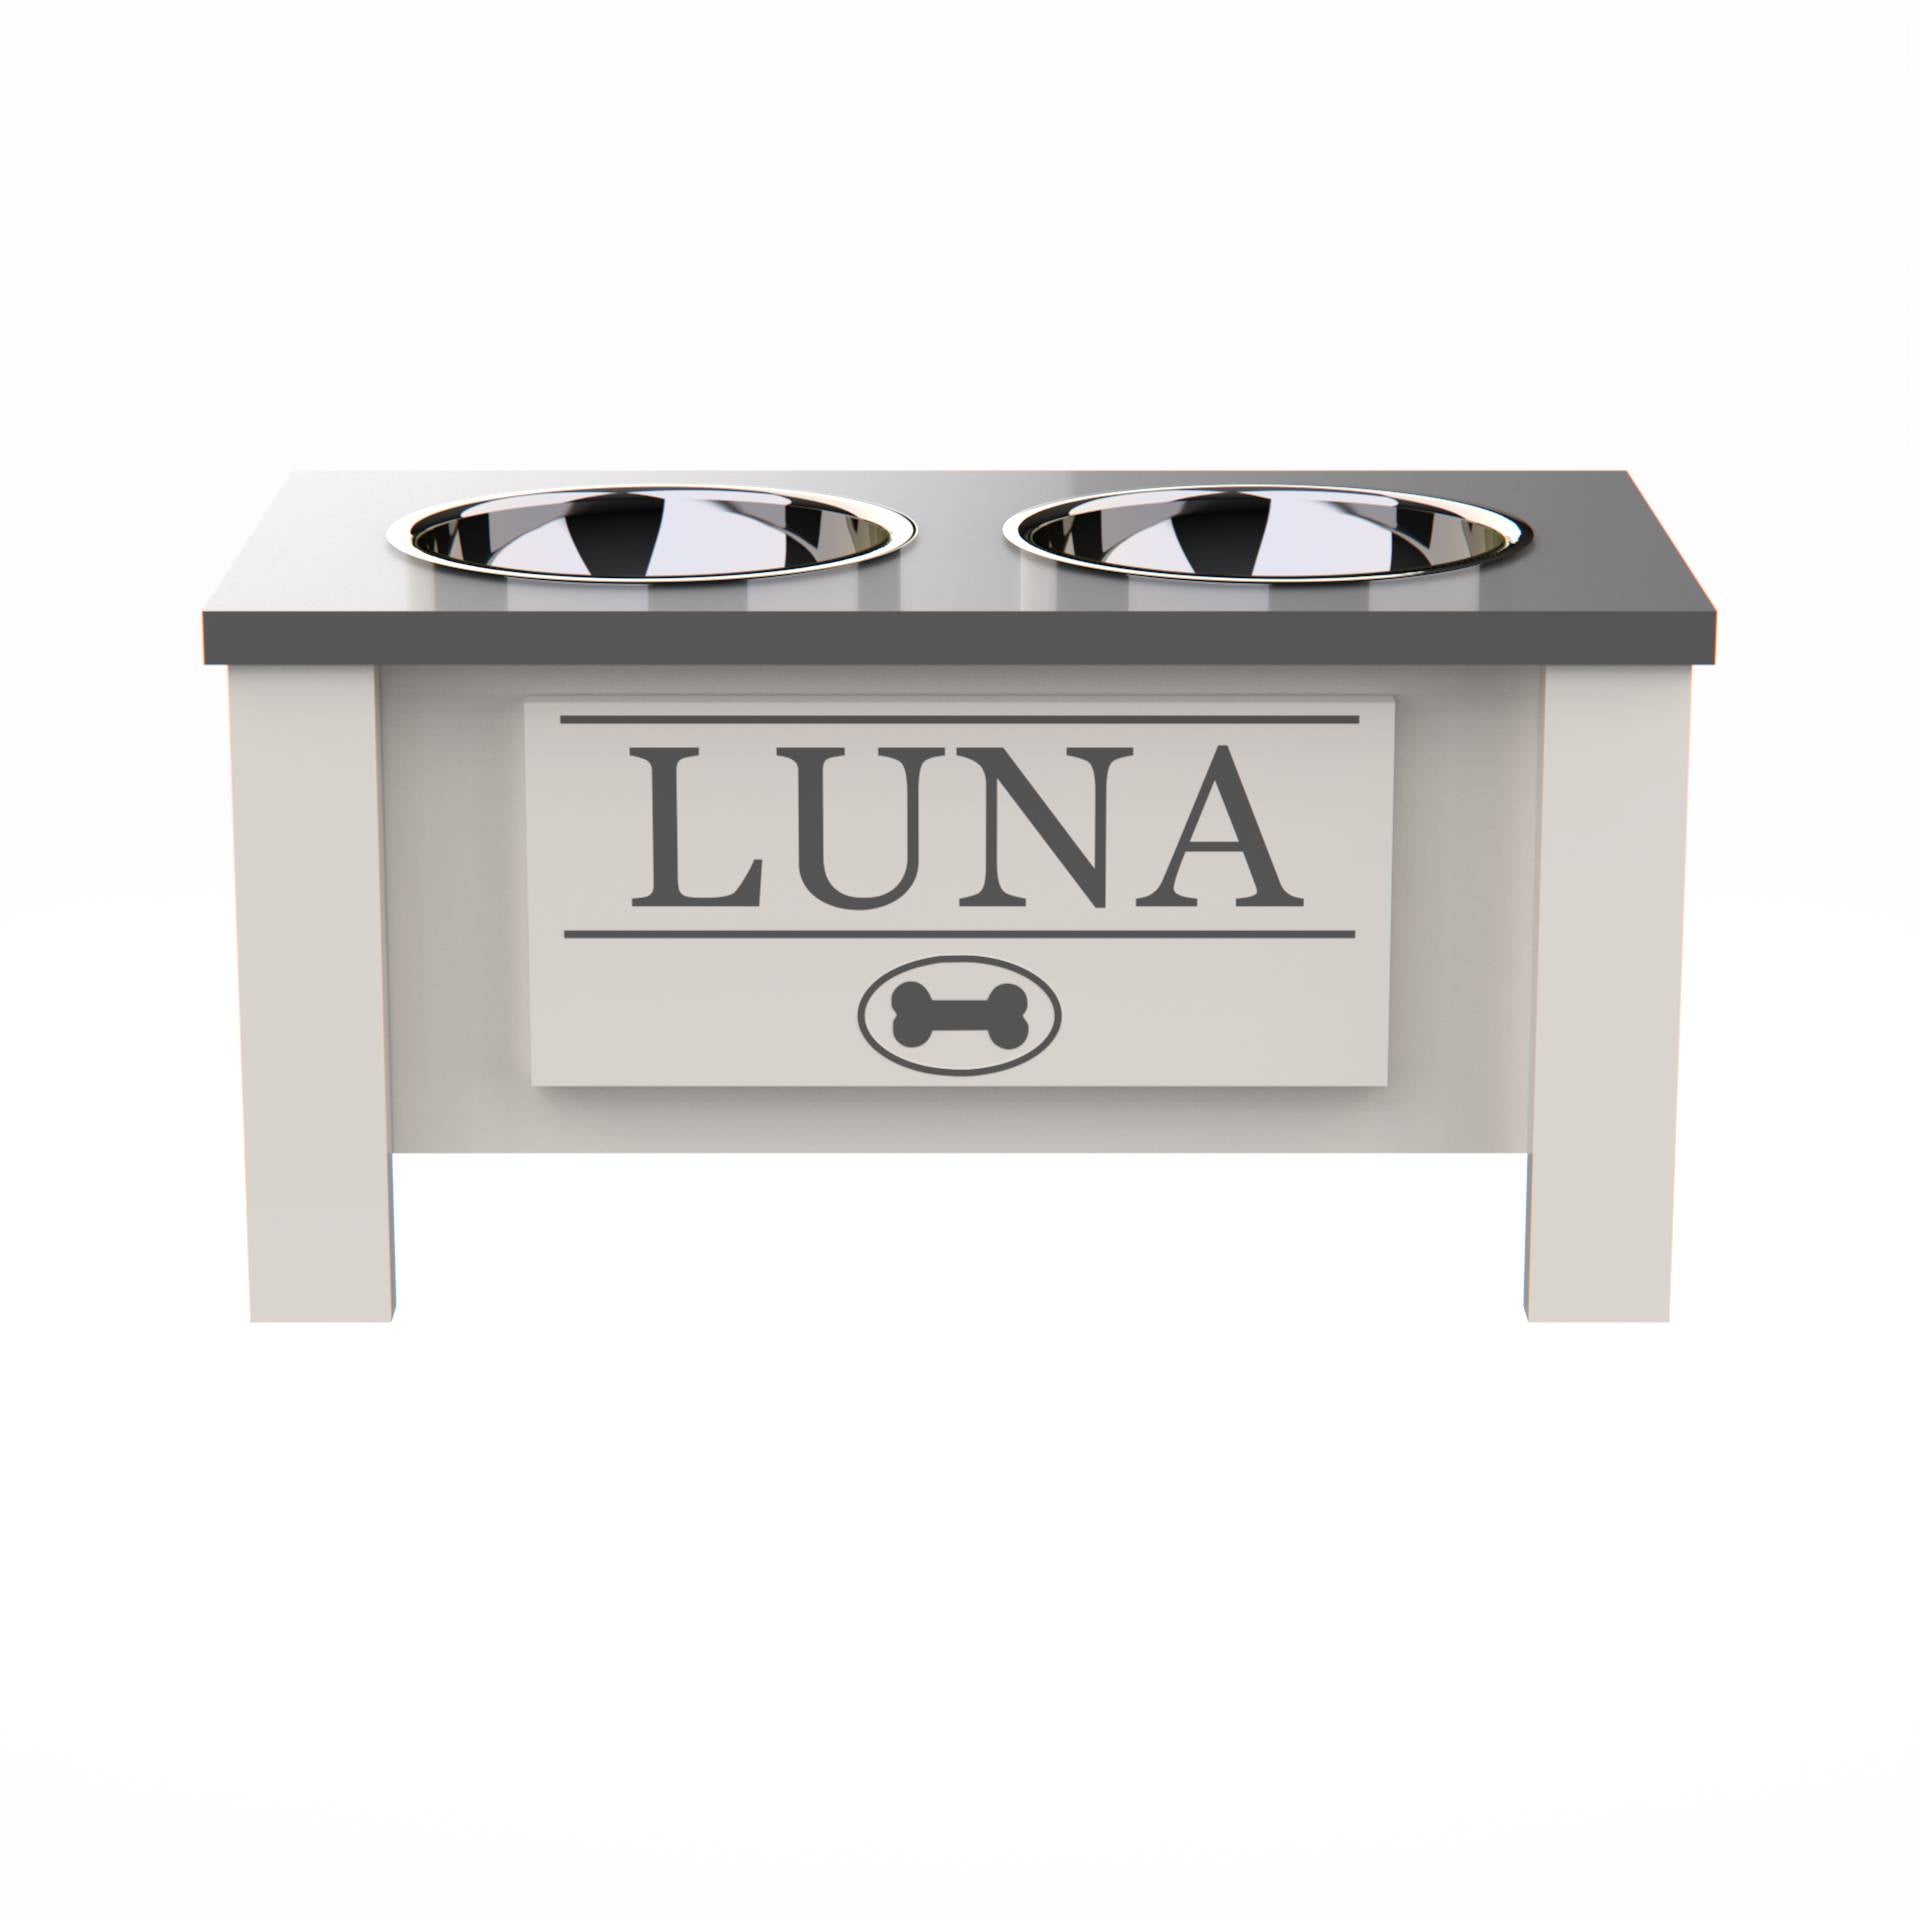 Personalized Elevated Dog Bowl in Lunar Grey - GrooveThis Woodshop - GT002GREY-M